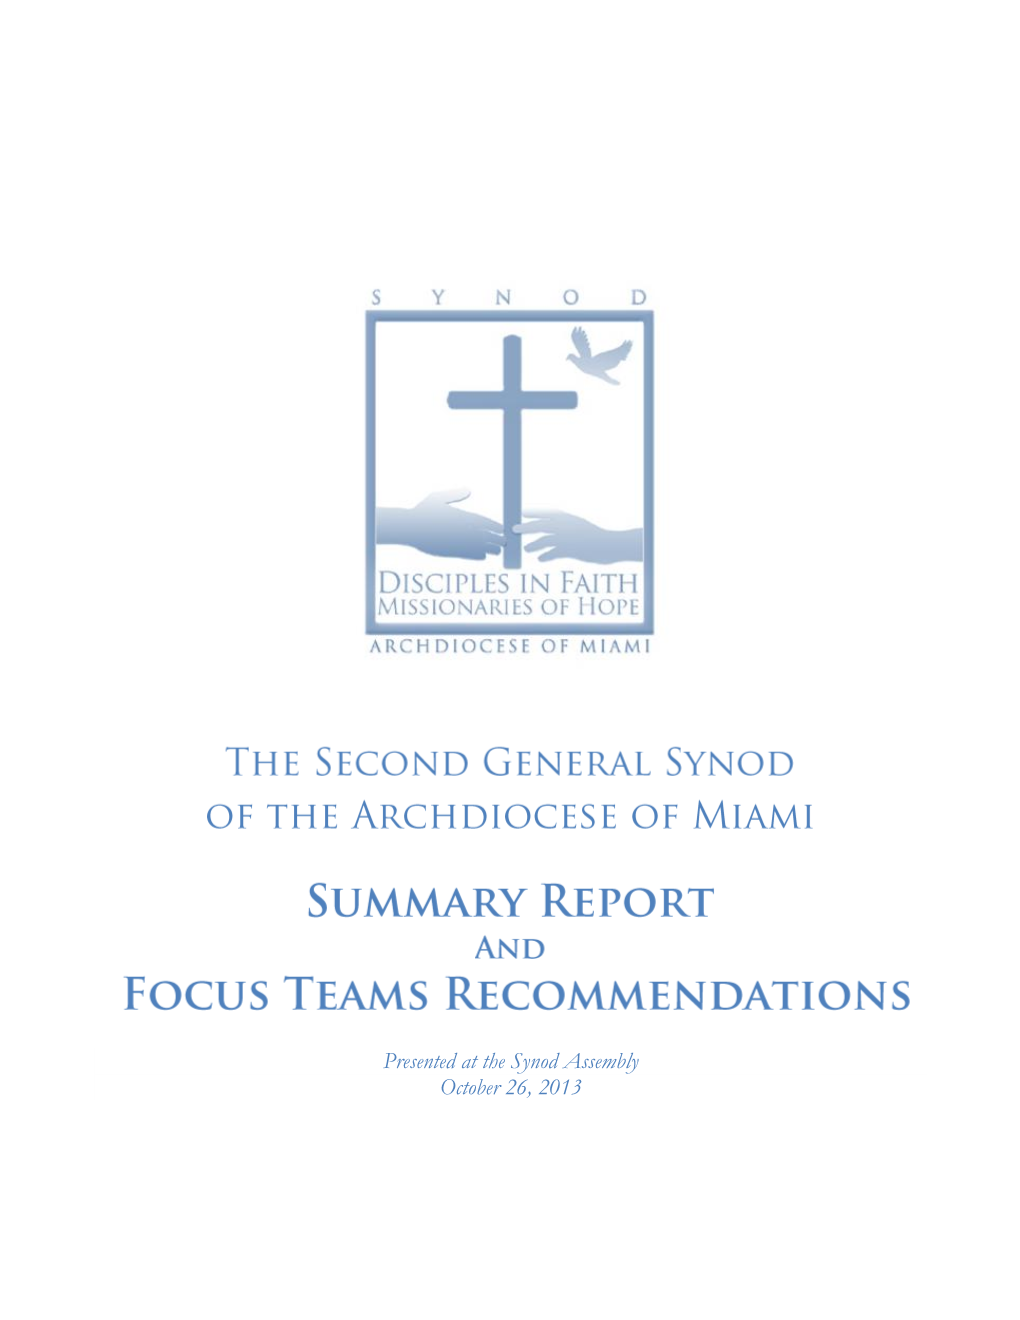 Synod Summary Report and Focus Team Recommendations